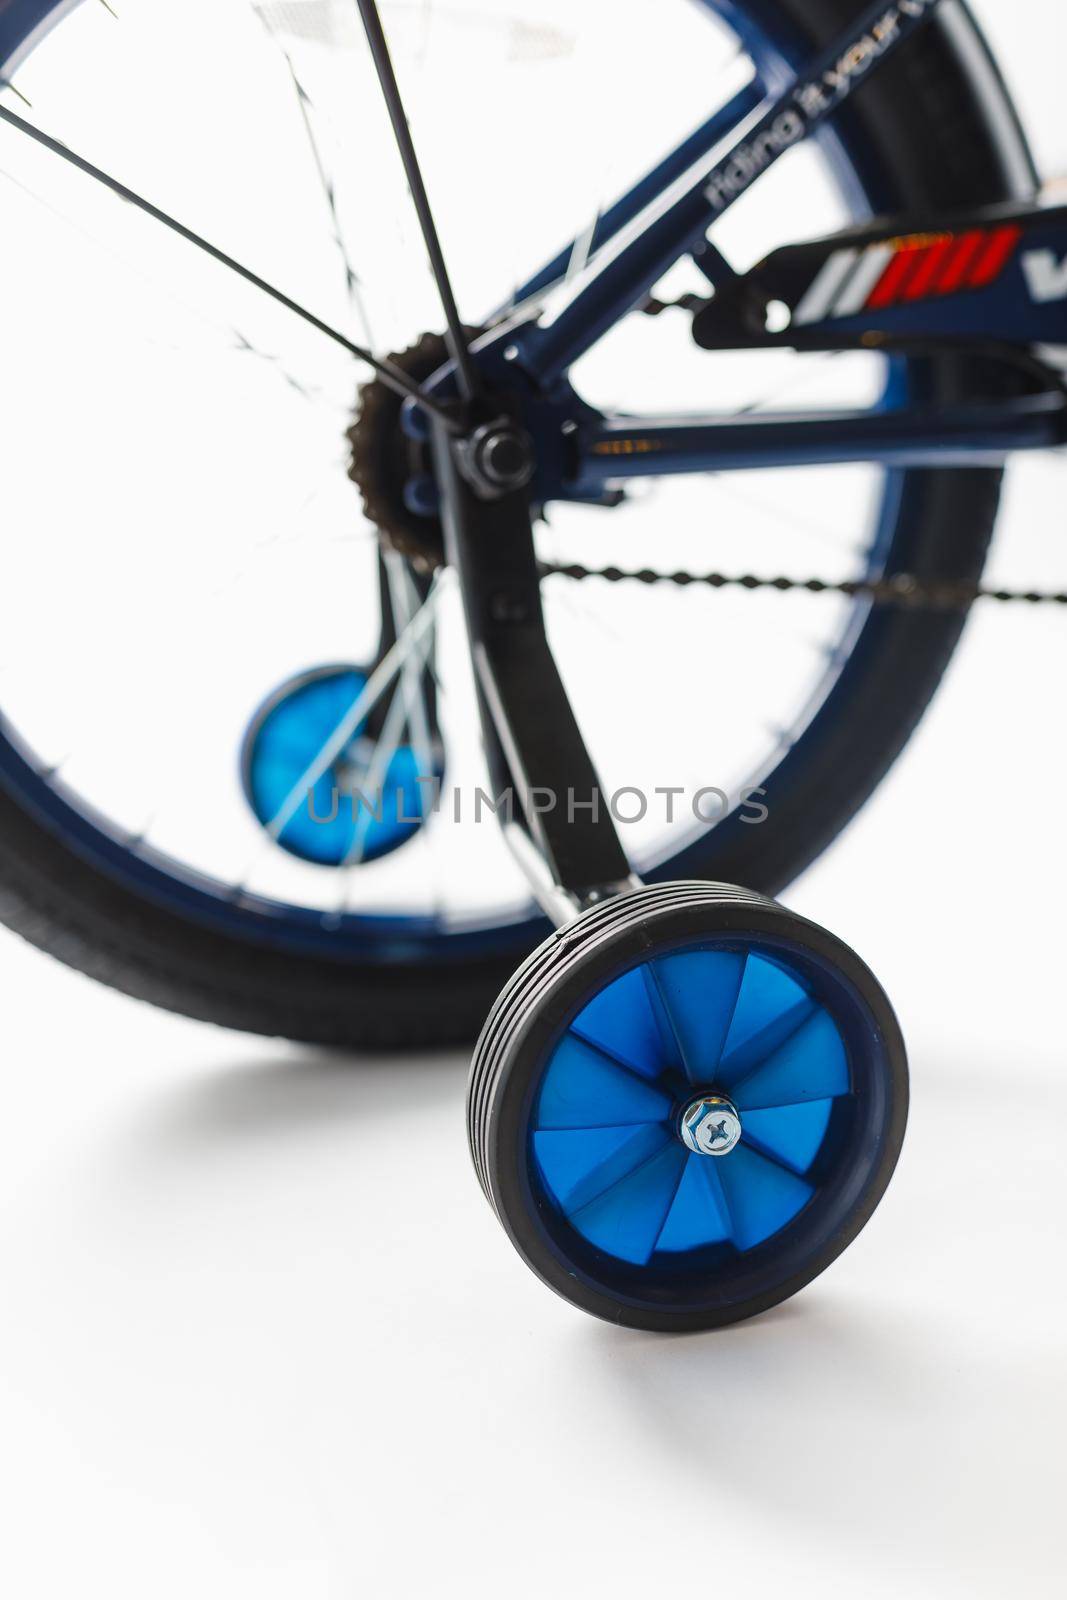 training wheels of kids bike with, close-up view